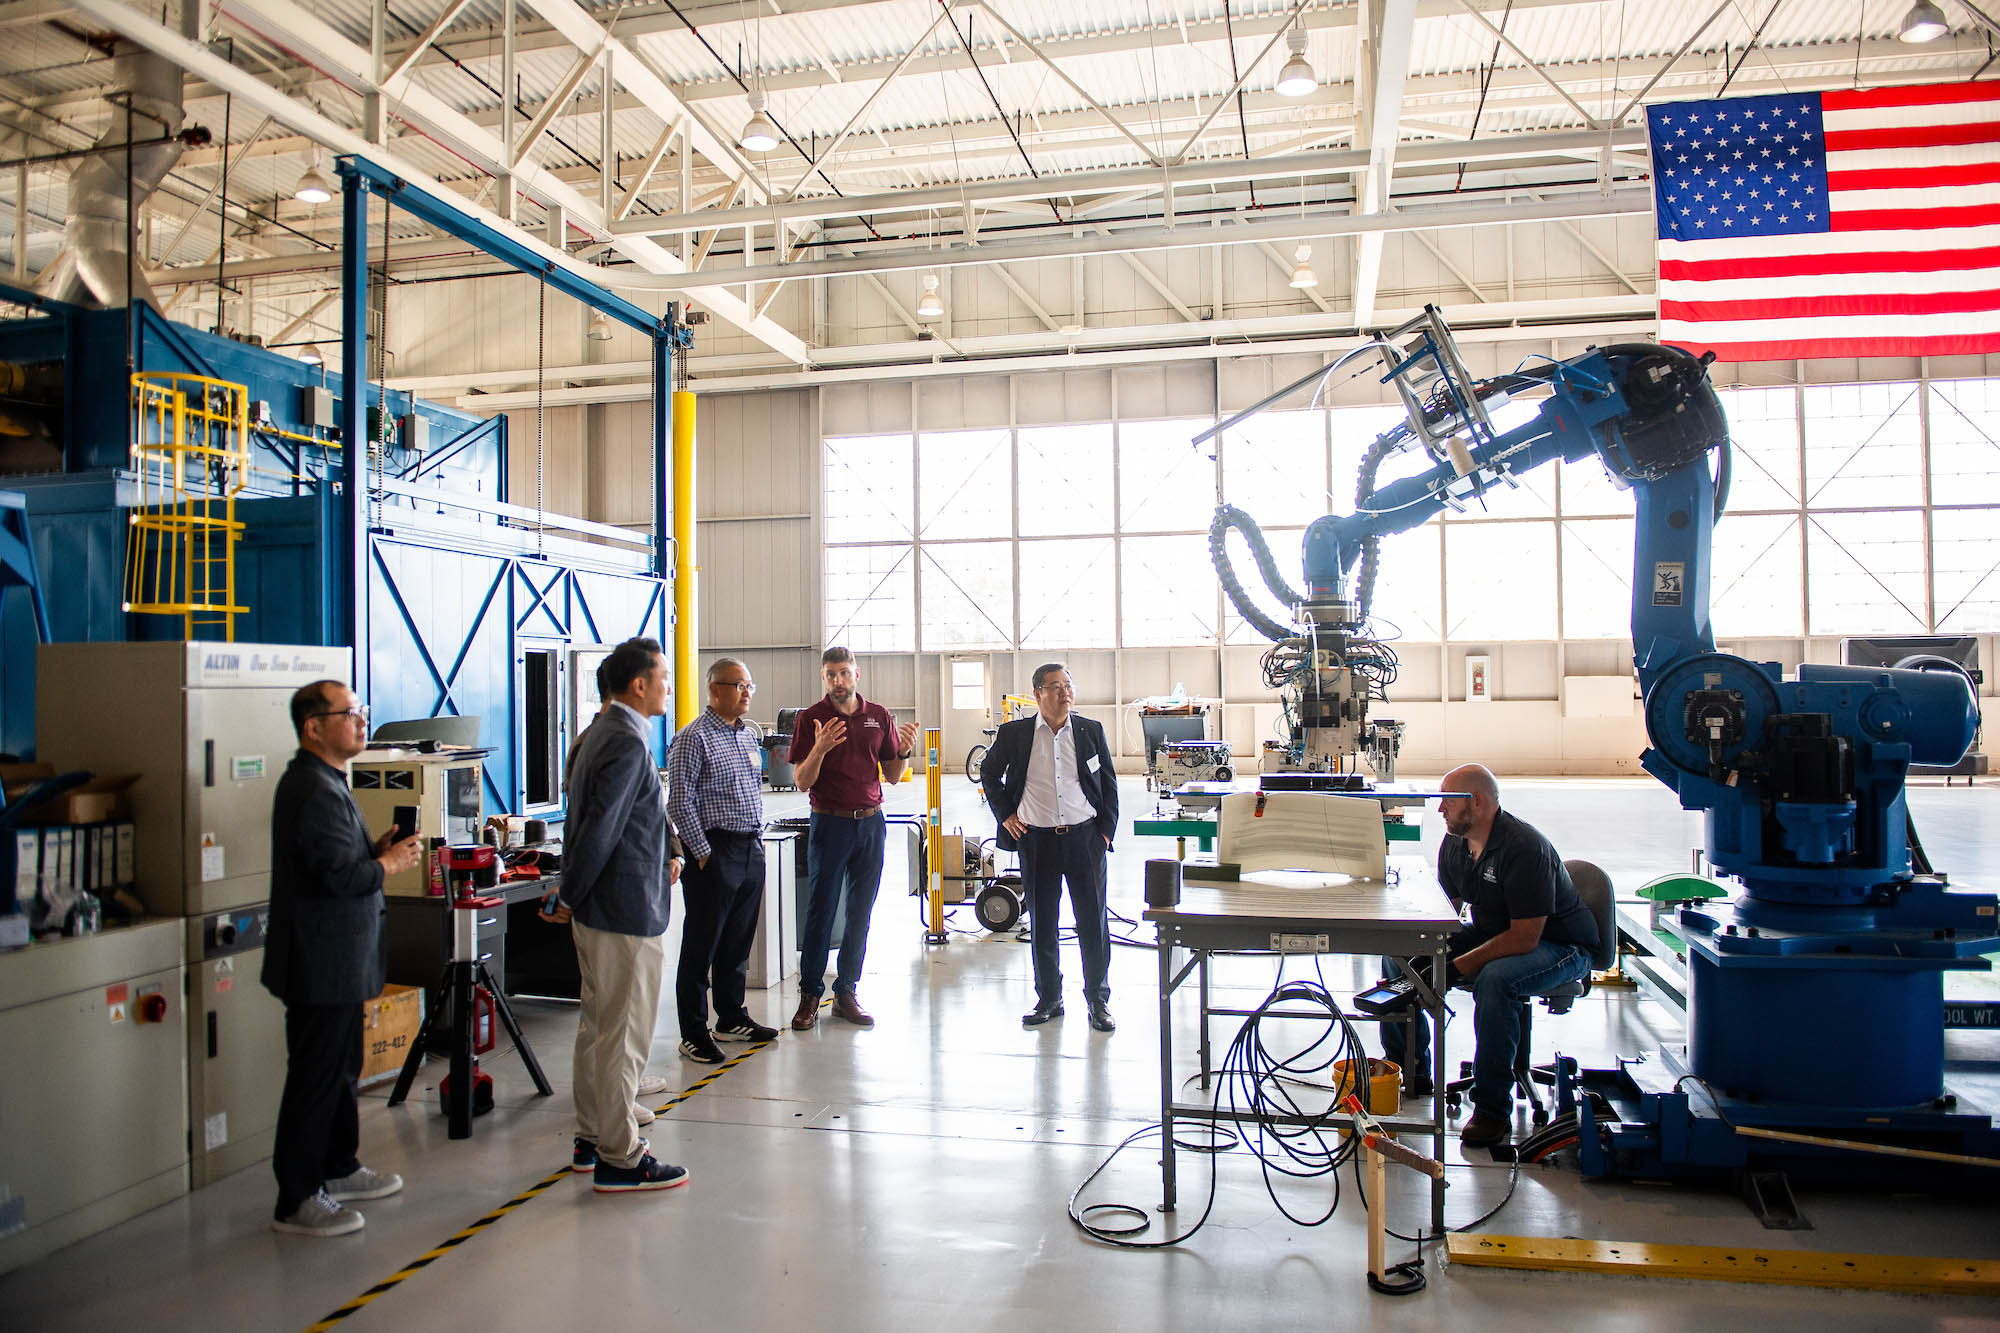 Visitors tour the Advanced Composites Institute, which includes large equipment in a hangar setting